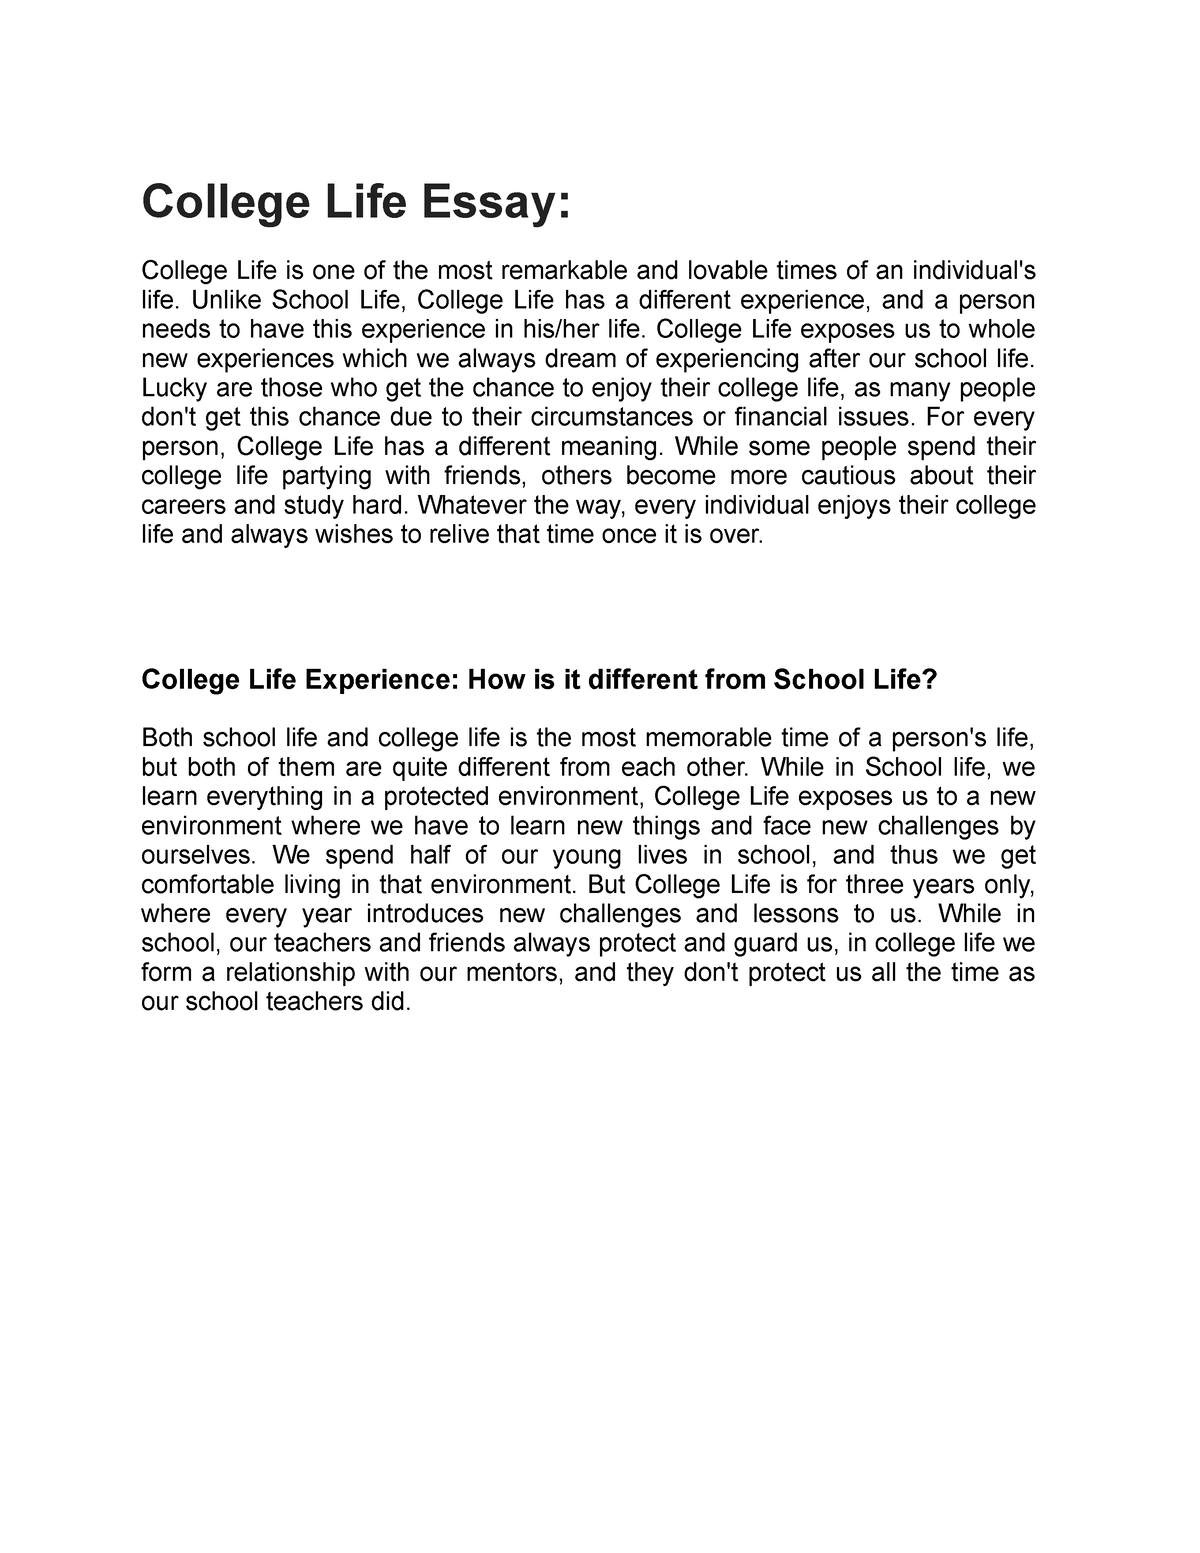 your college life essay